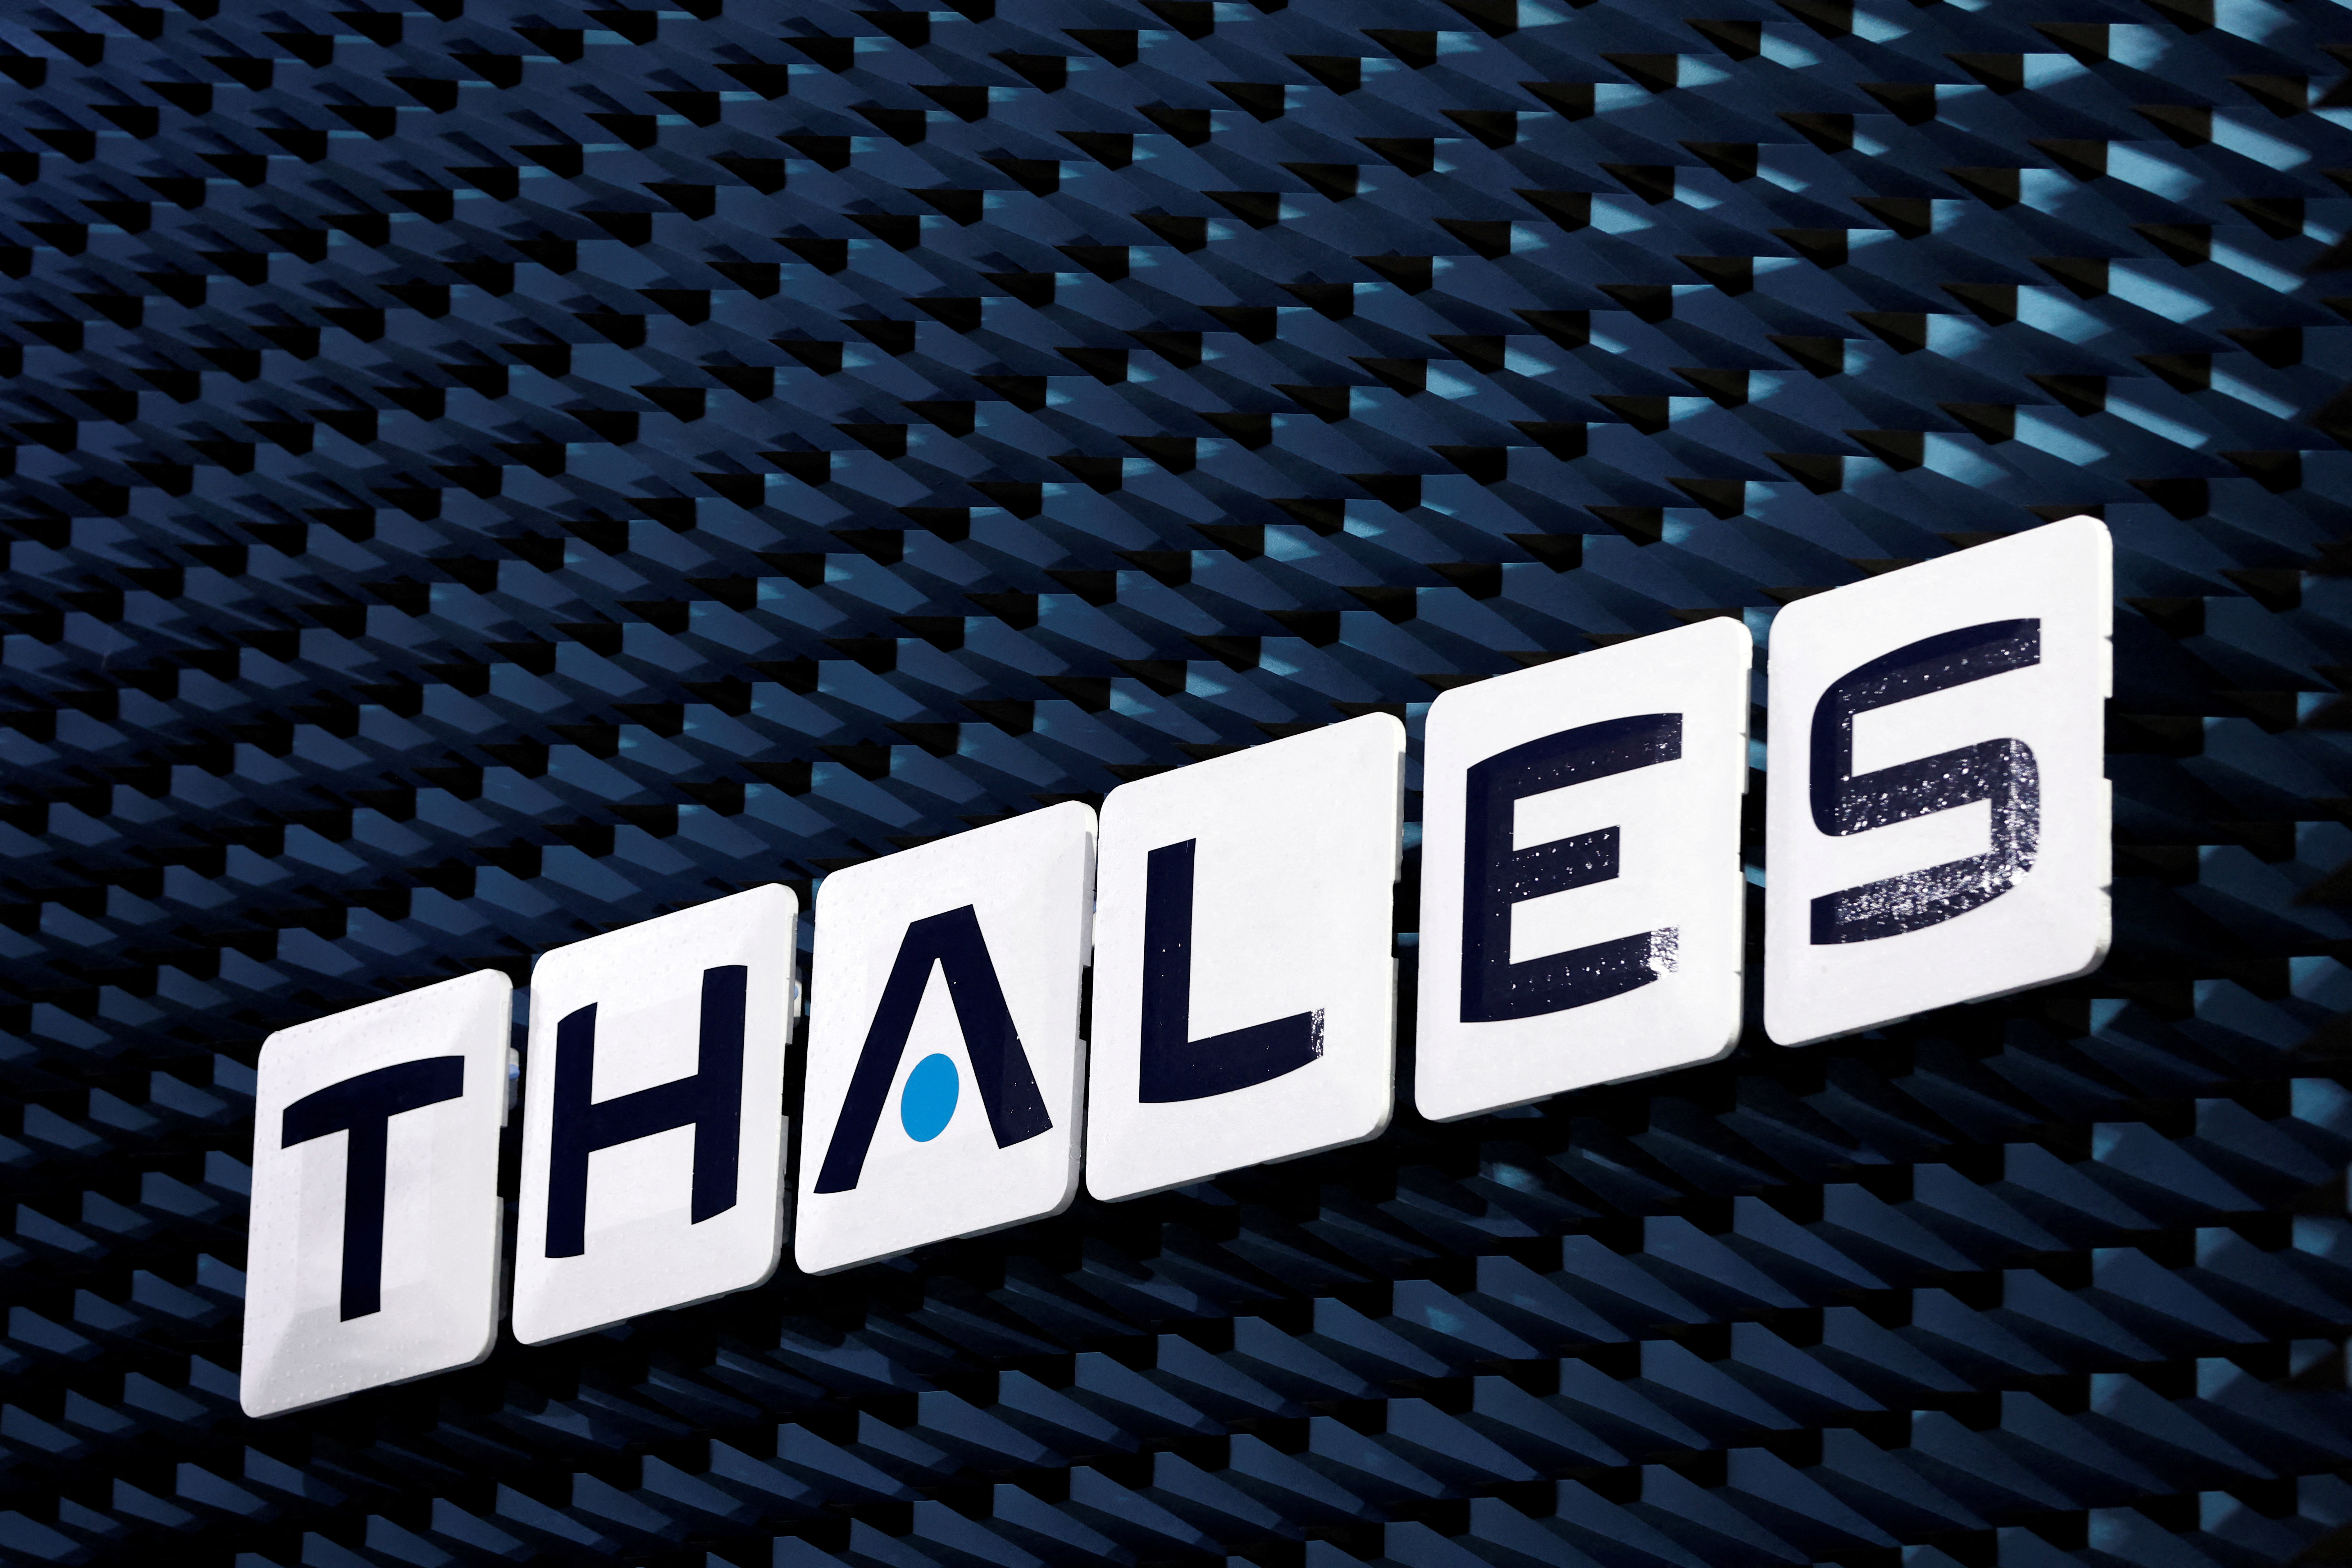 Thales posts higher nine-month revenue, maintains targets